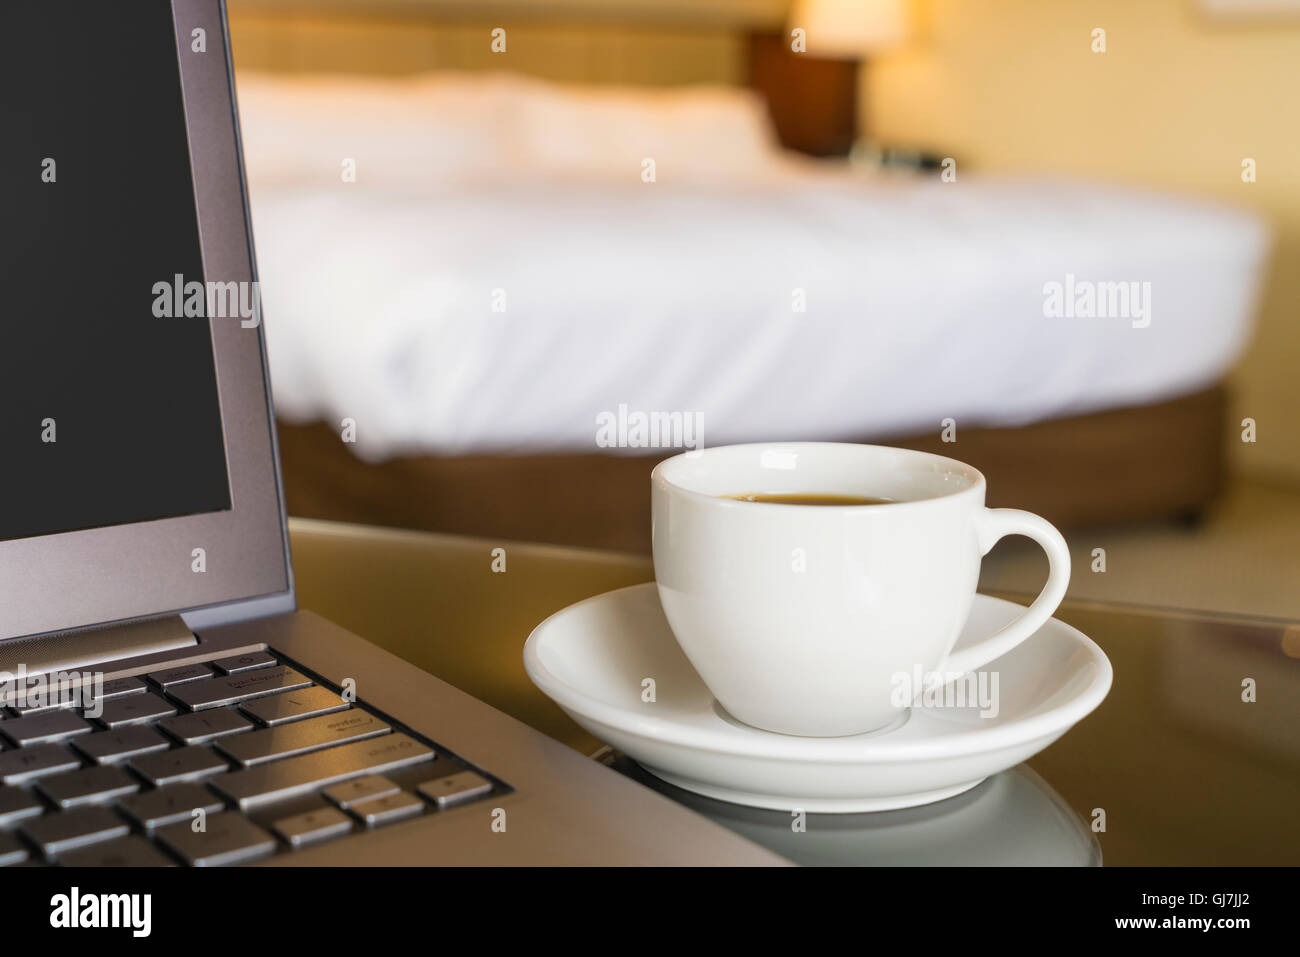 Working in hotel room Stock Photo